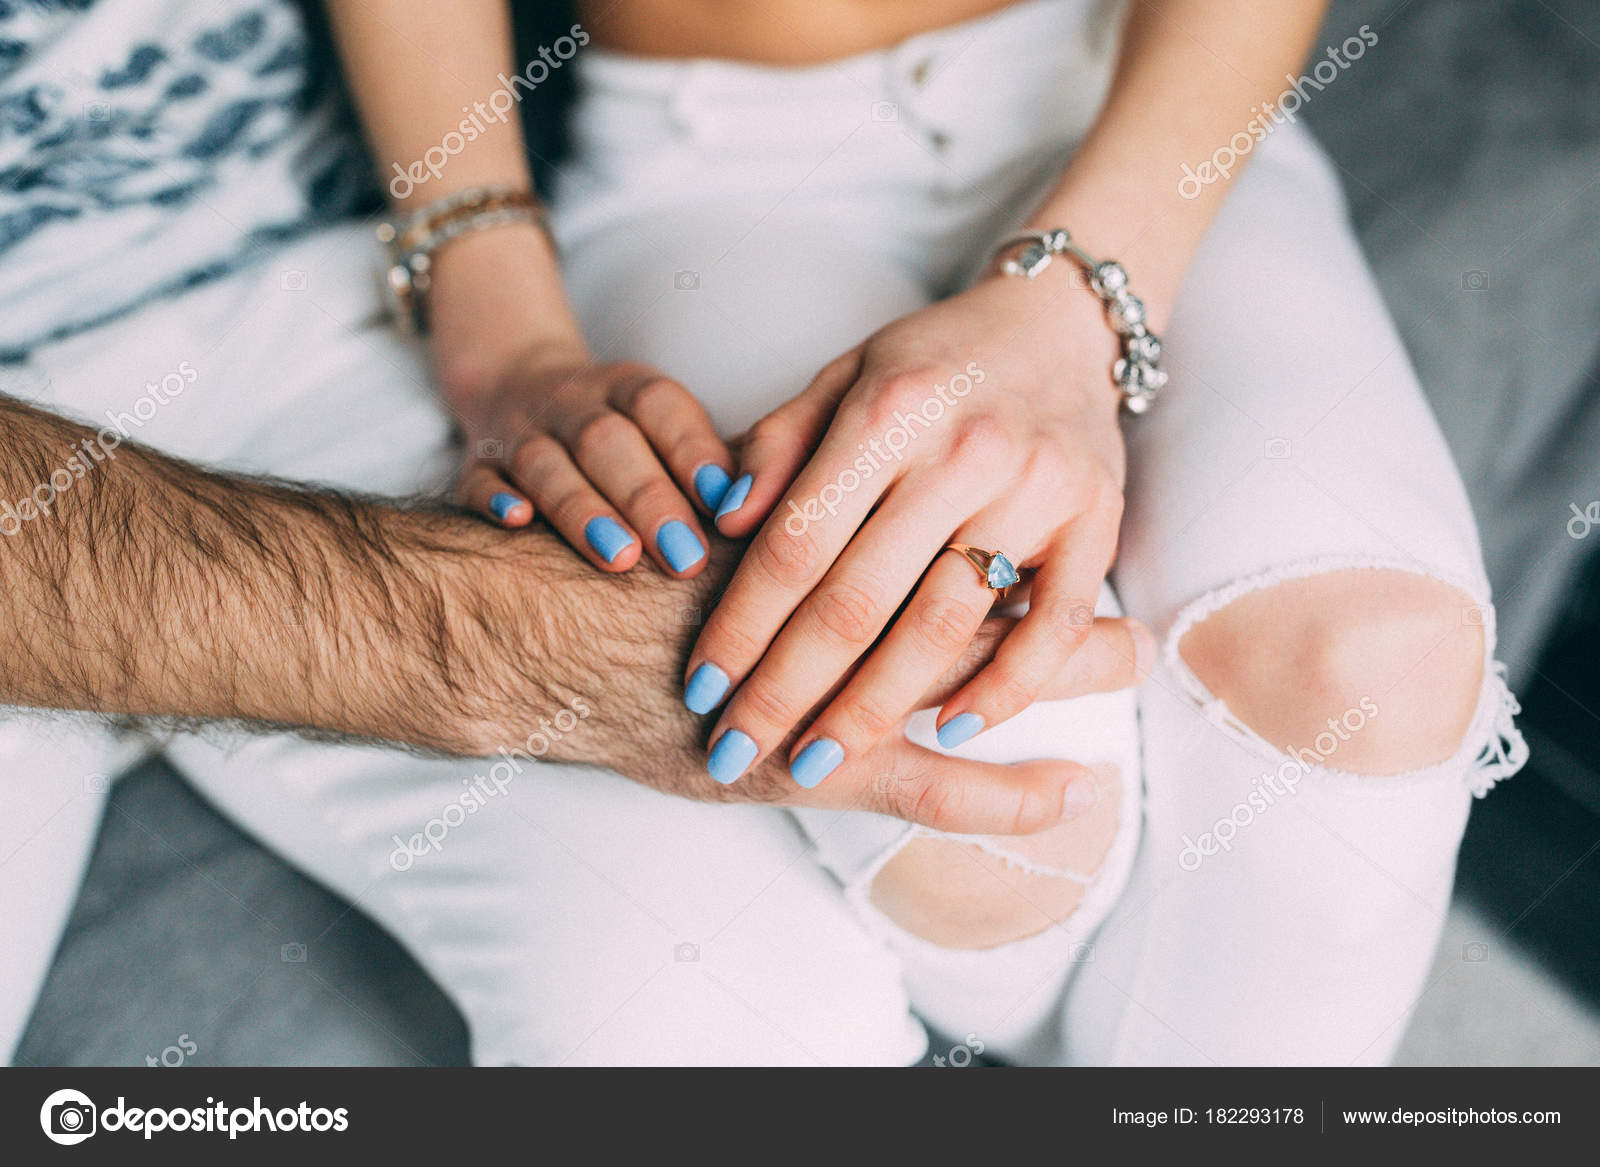 Boy And Girl Holding Hands Real Images Images Poster